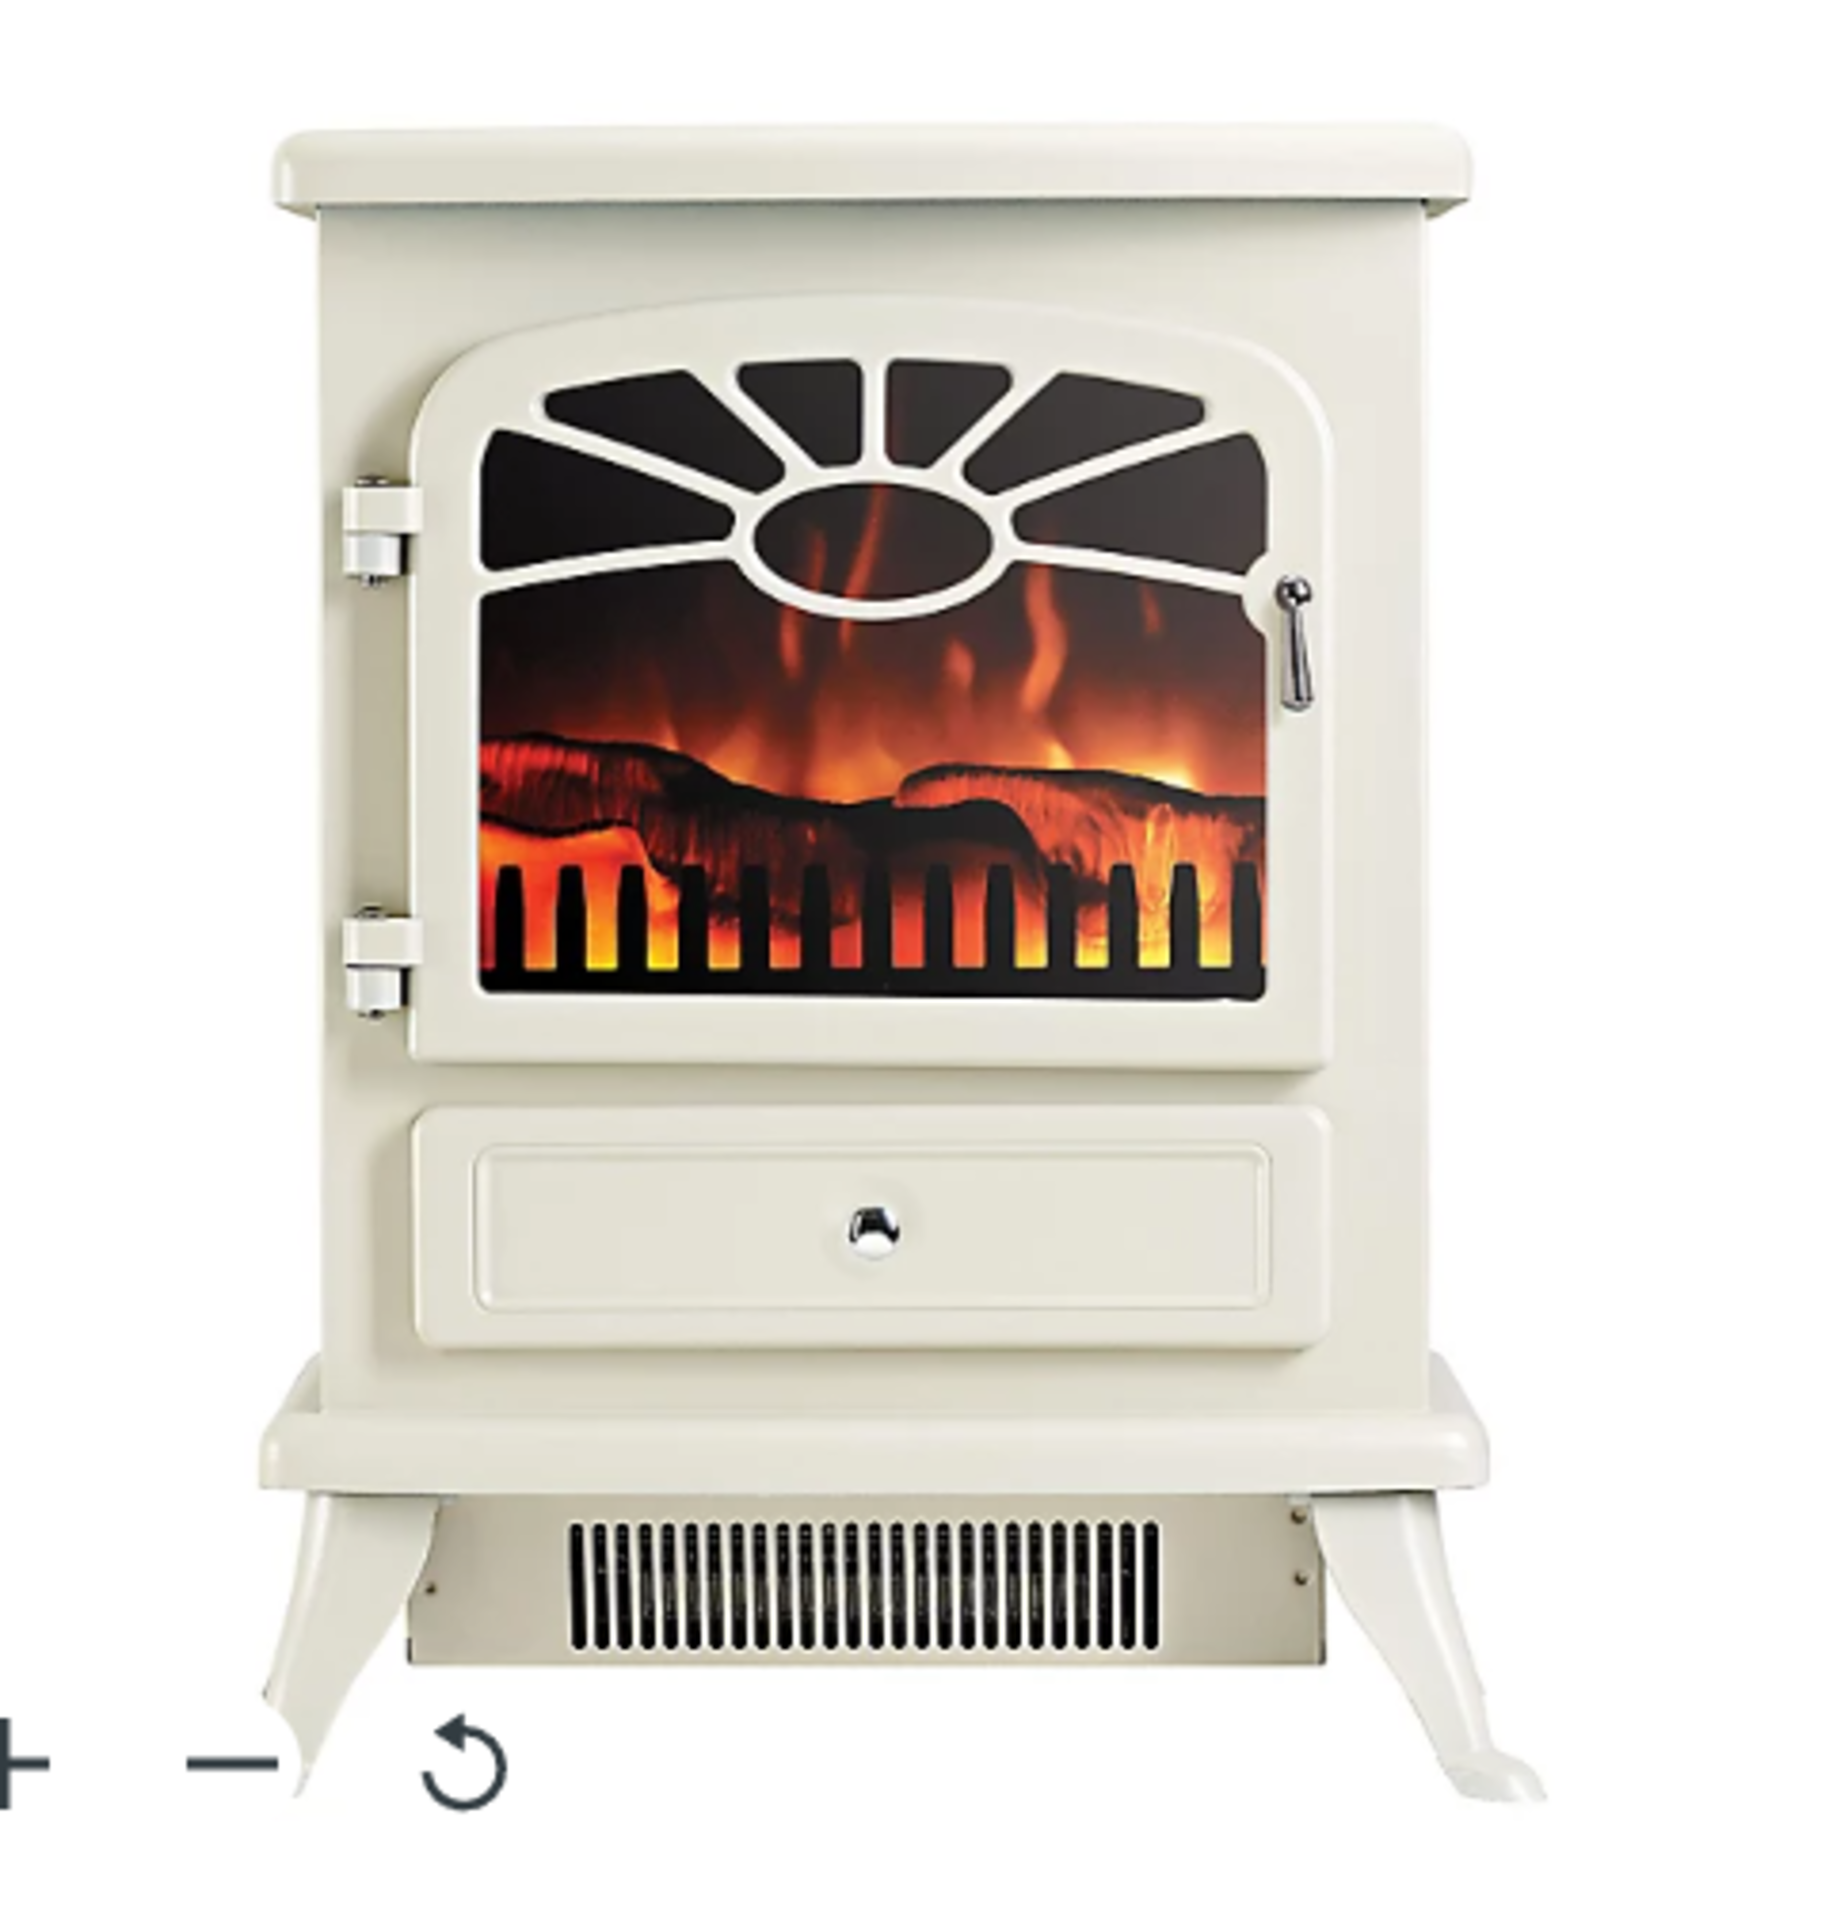 Focal Point ES 2000 1.8kW Matt Cream Electric Stove. - ER41. This electric fire features a which